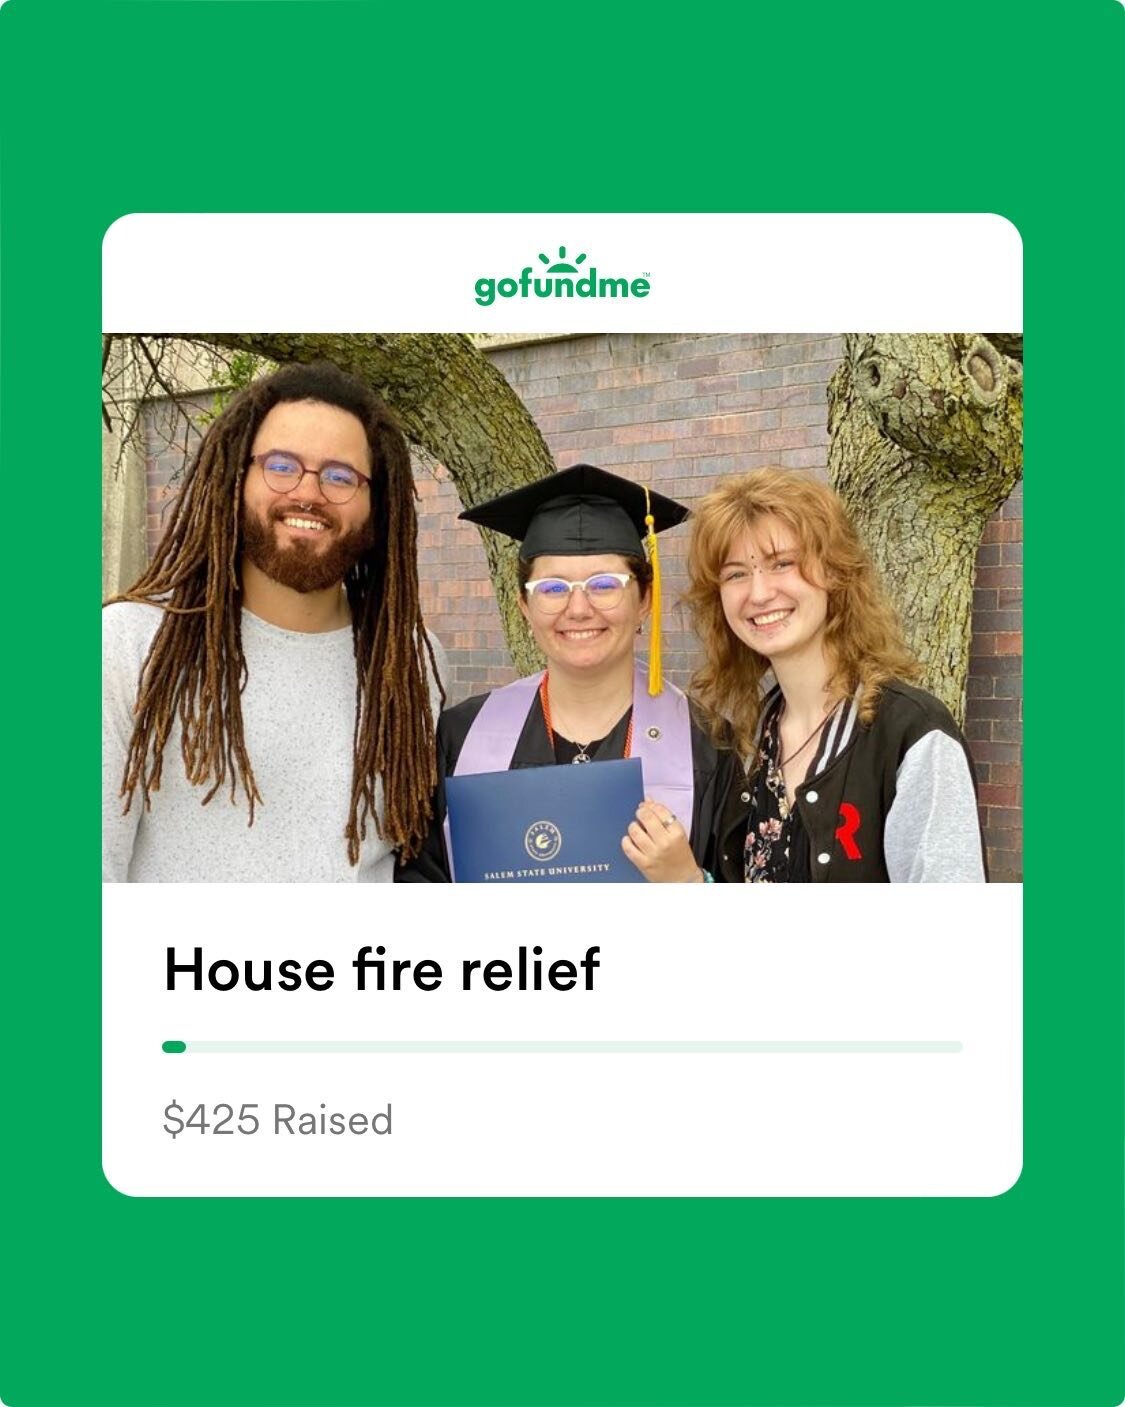 My wonderful daughter, Anastasia, her husband Obi, and their friend Kris, have faced an unimaginable tragedy. This past Friday, in Lowell, MA, they lost their home to a devastating house fire, along with every possession they held dear, and their bel